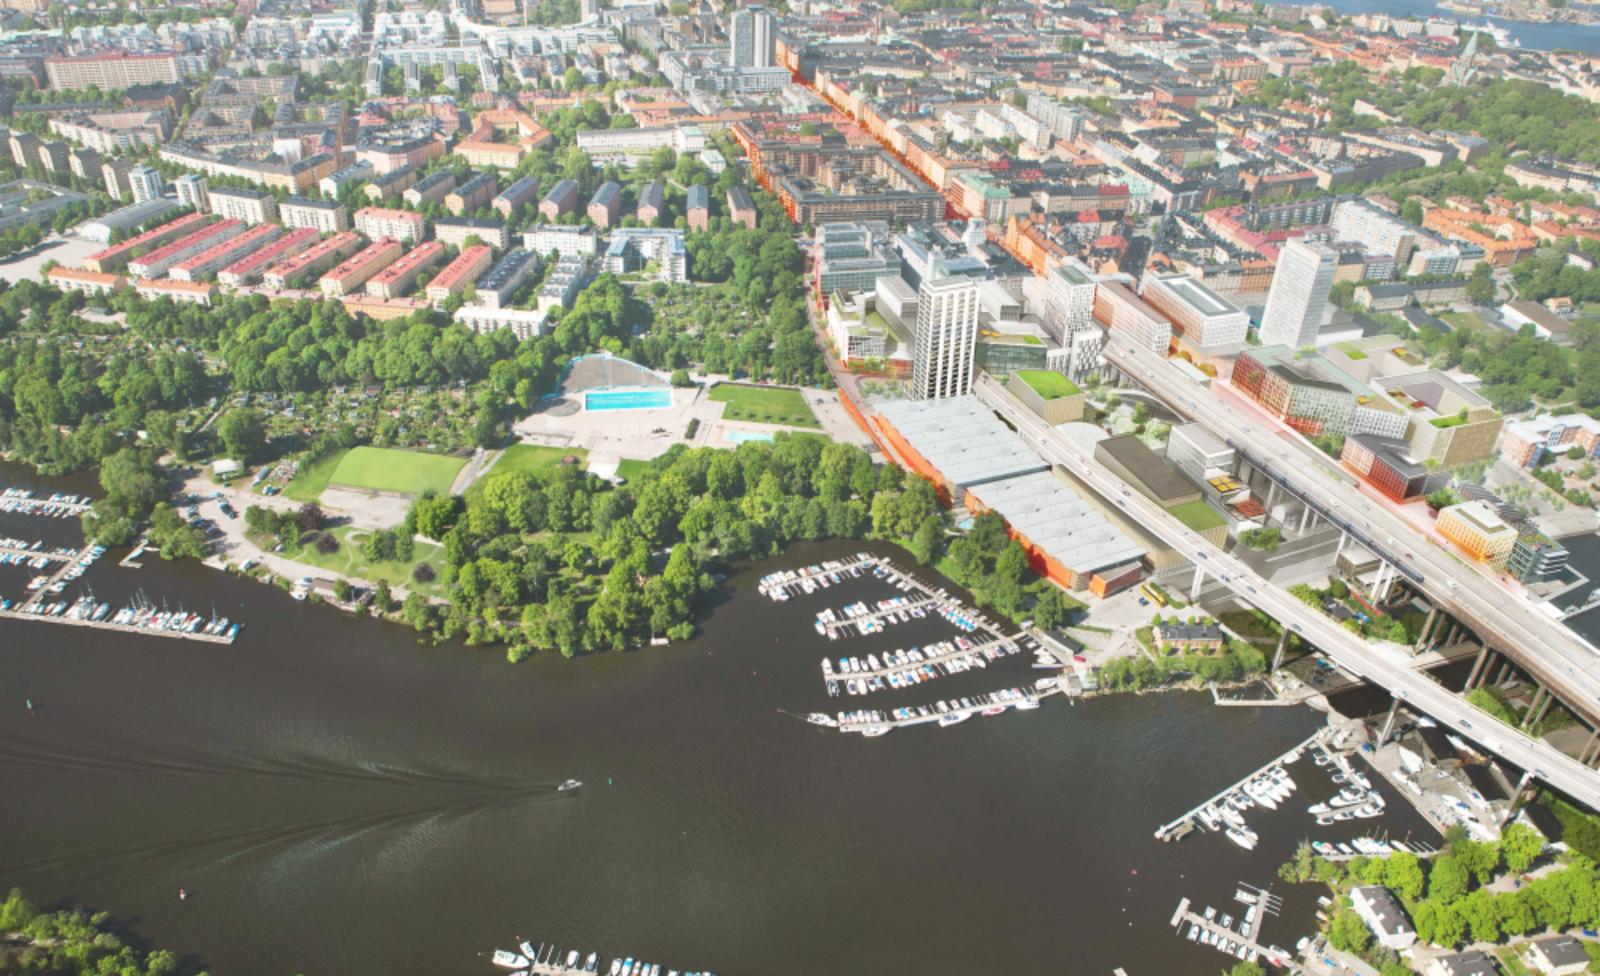 Plans to reclaim underutilized areas of Stockholm